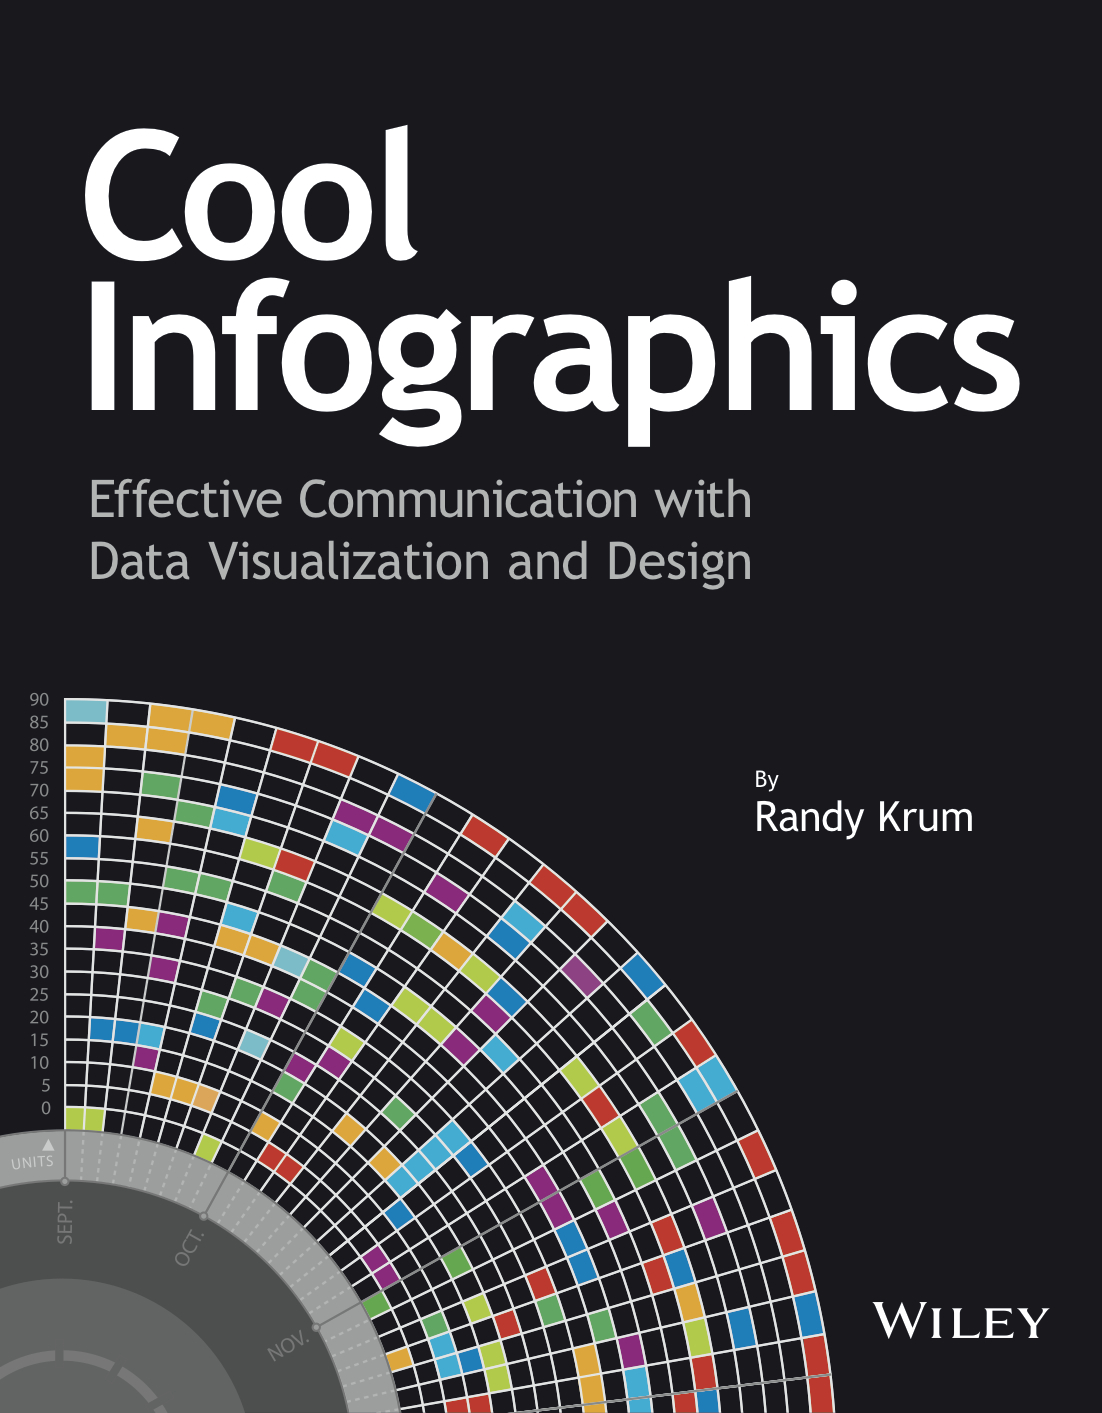 Cool Infographics the book